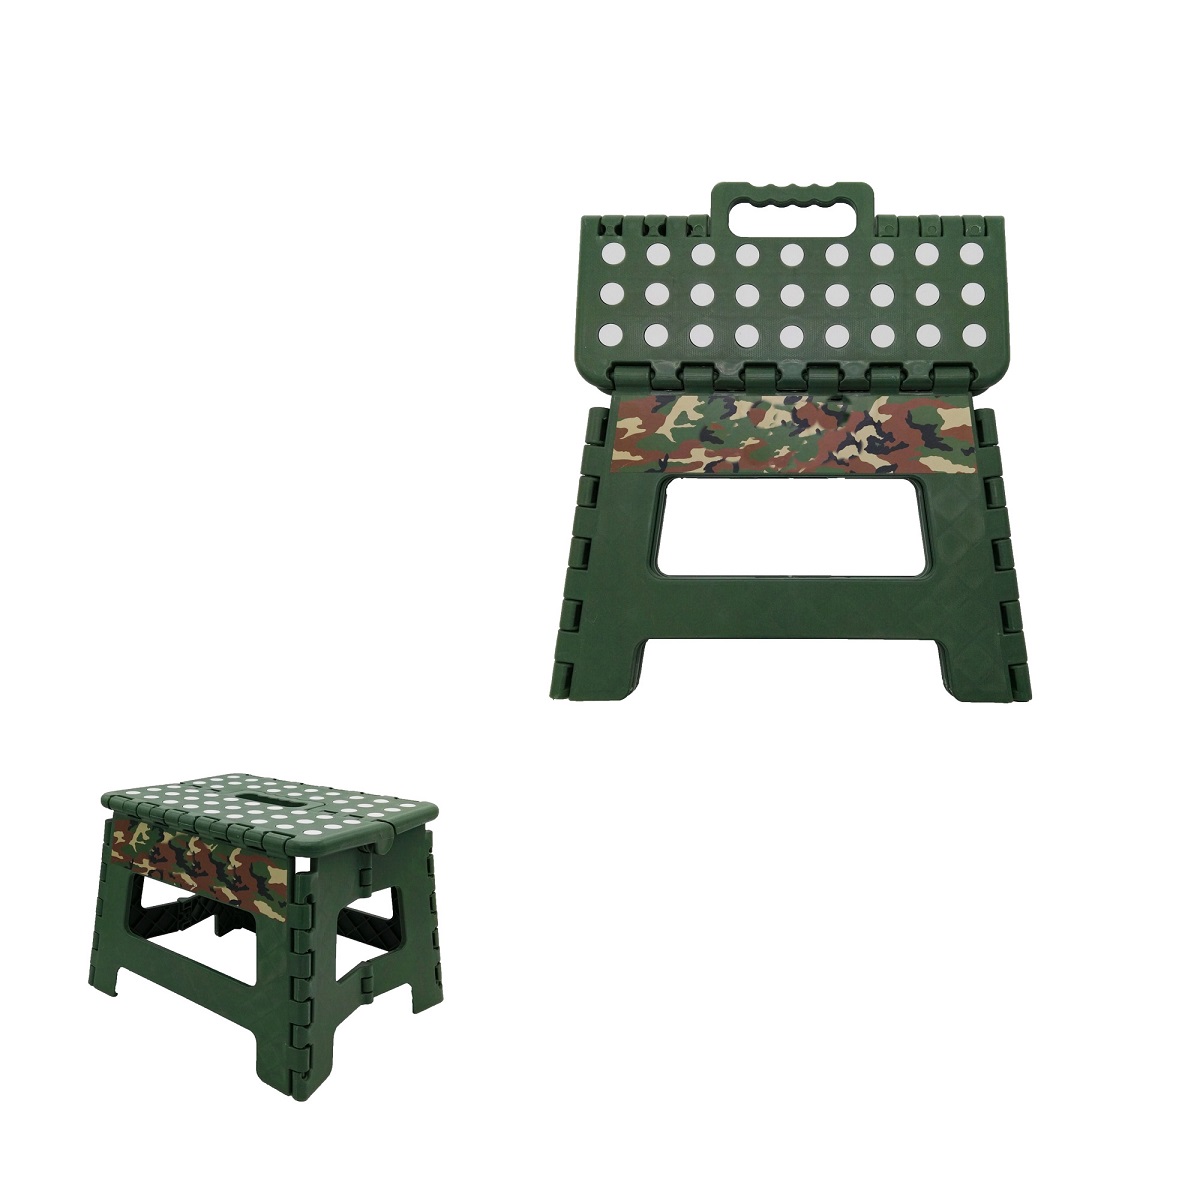 GL-AAA1097 Plastic Folding Stool Convenient Chair Collapsible Bench